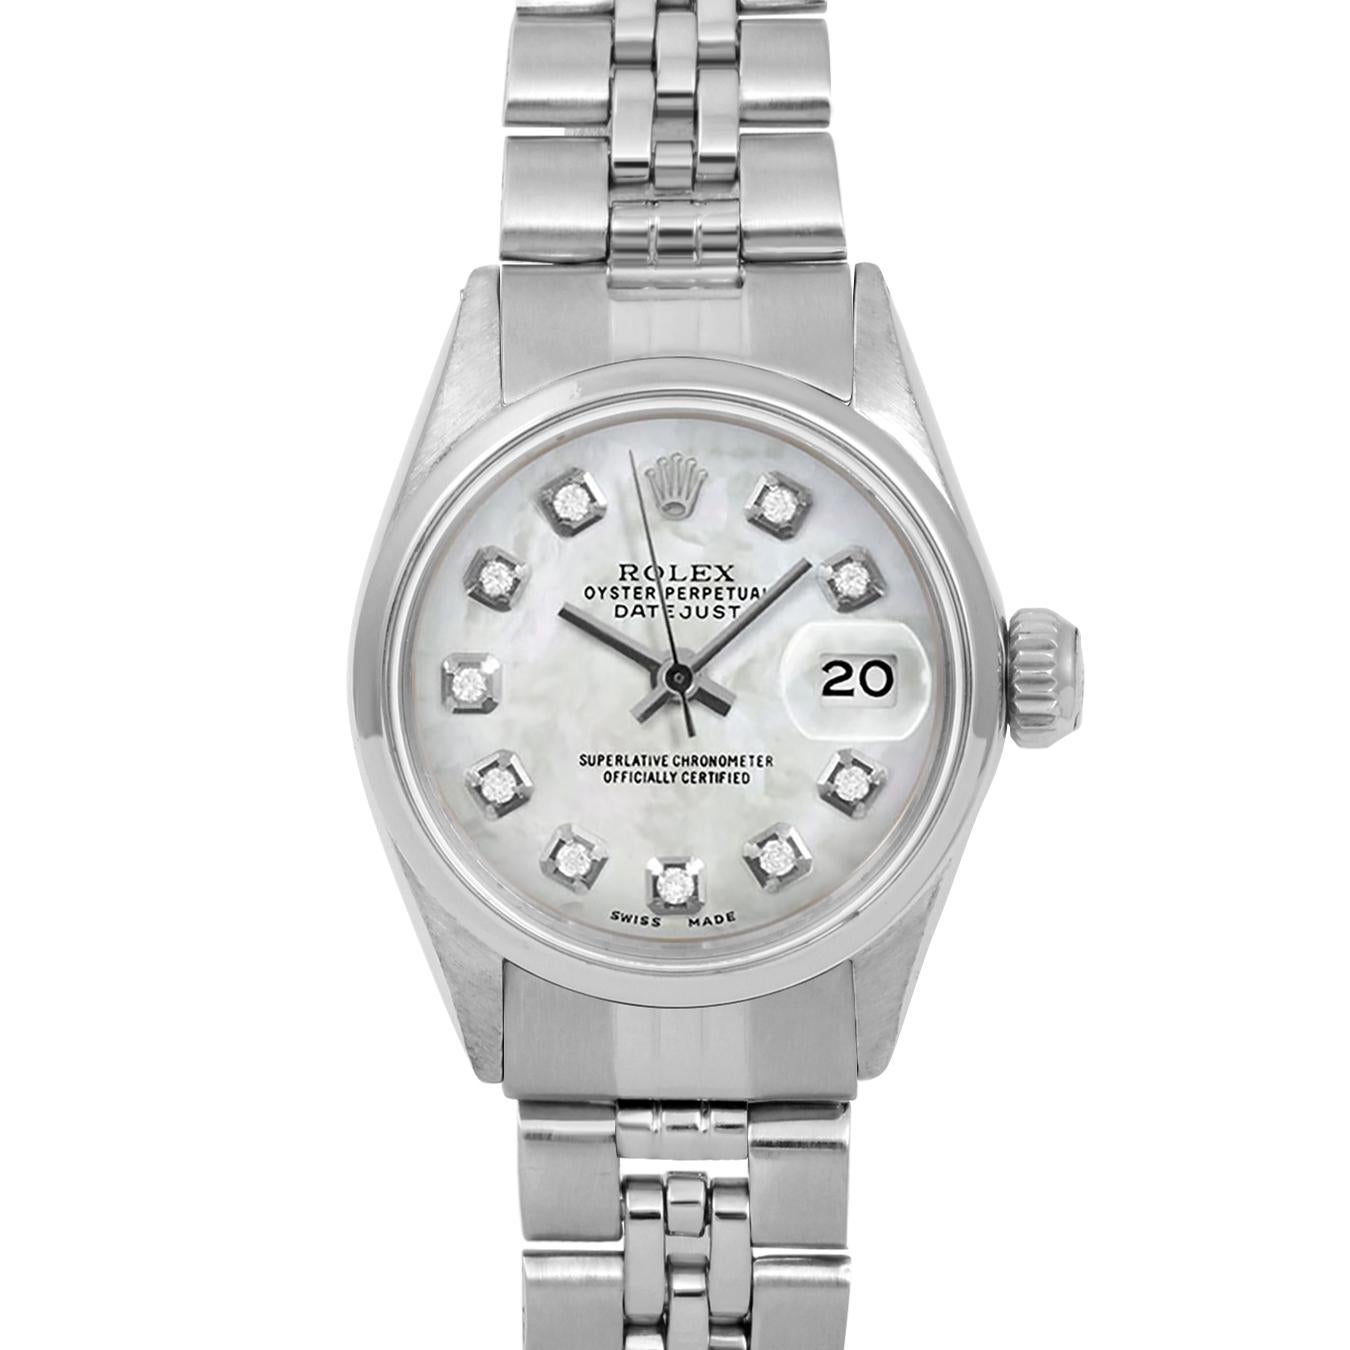 Brand : Rolex
Model : Datejust (Non-Quickset Model)
Gender : Ladies
Metals : Stainless Steel
Case Size : 24 mm

Dial : Custom Mother Of Pearl Diamond Dial (This dial is not original Rolex And has been added aftermarket yet is a beautiful Custom